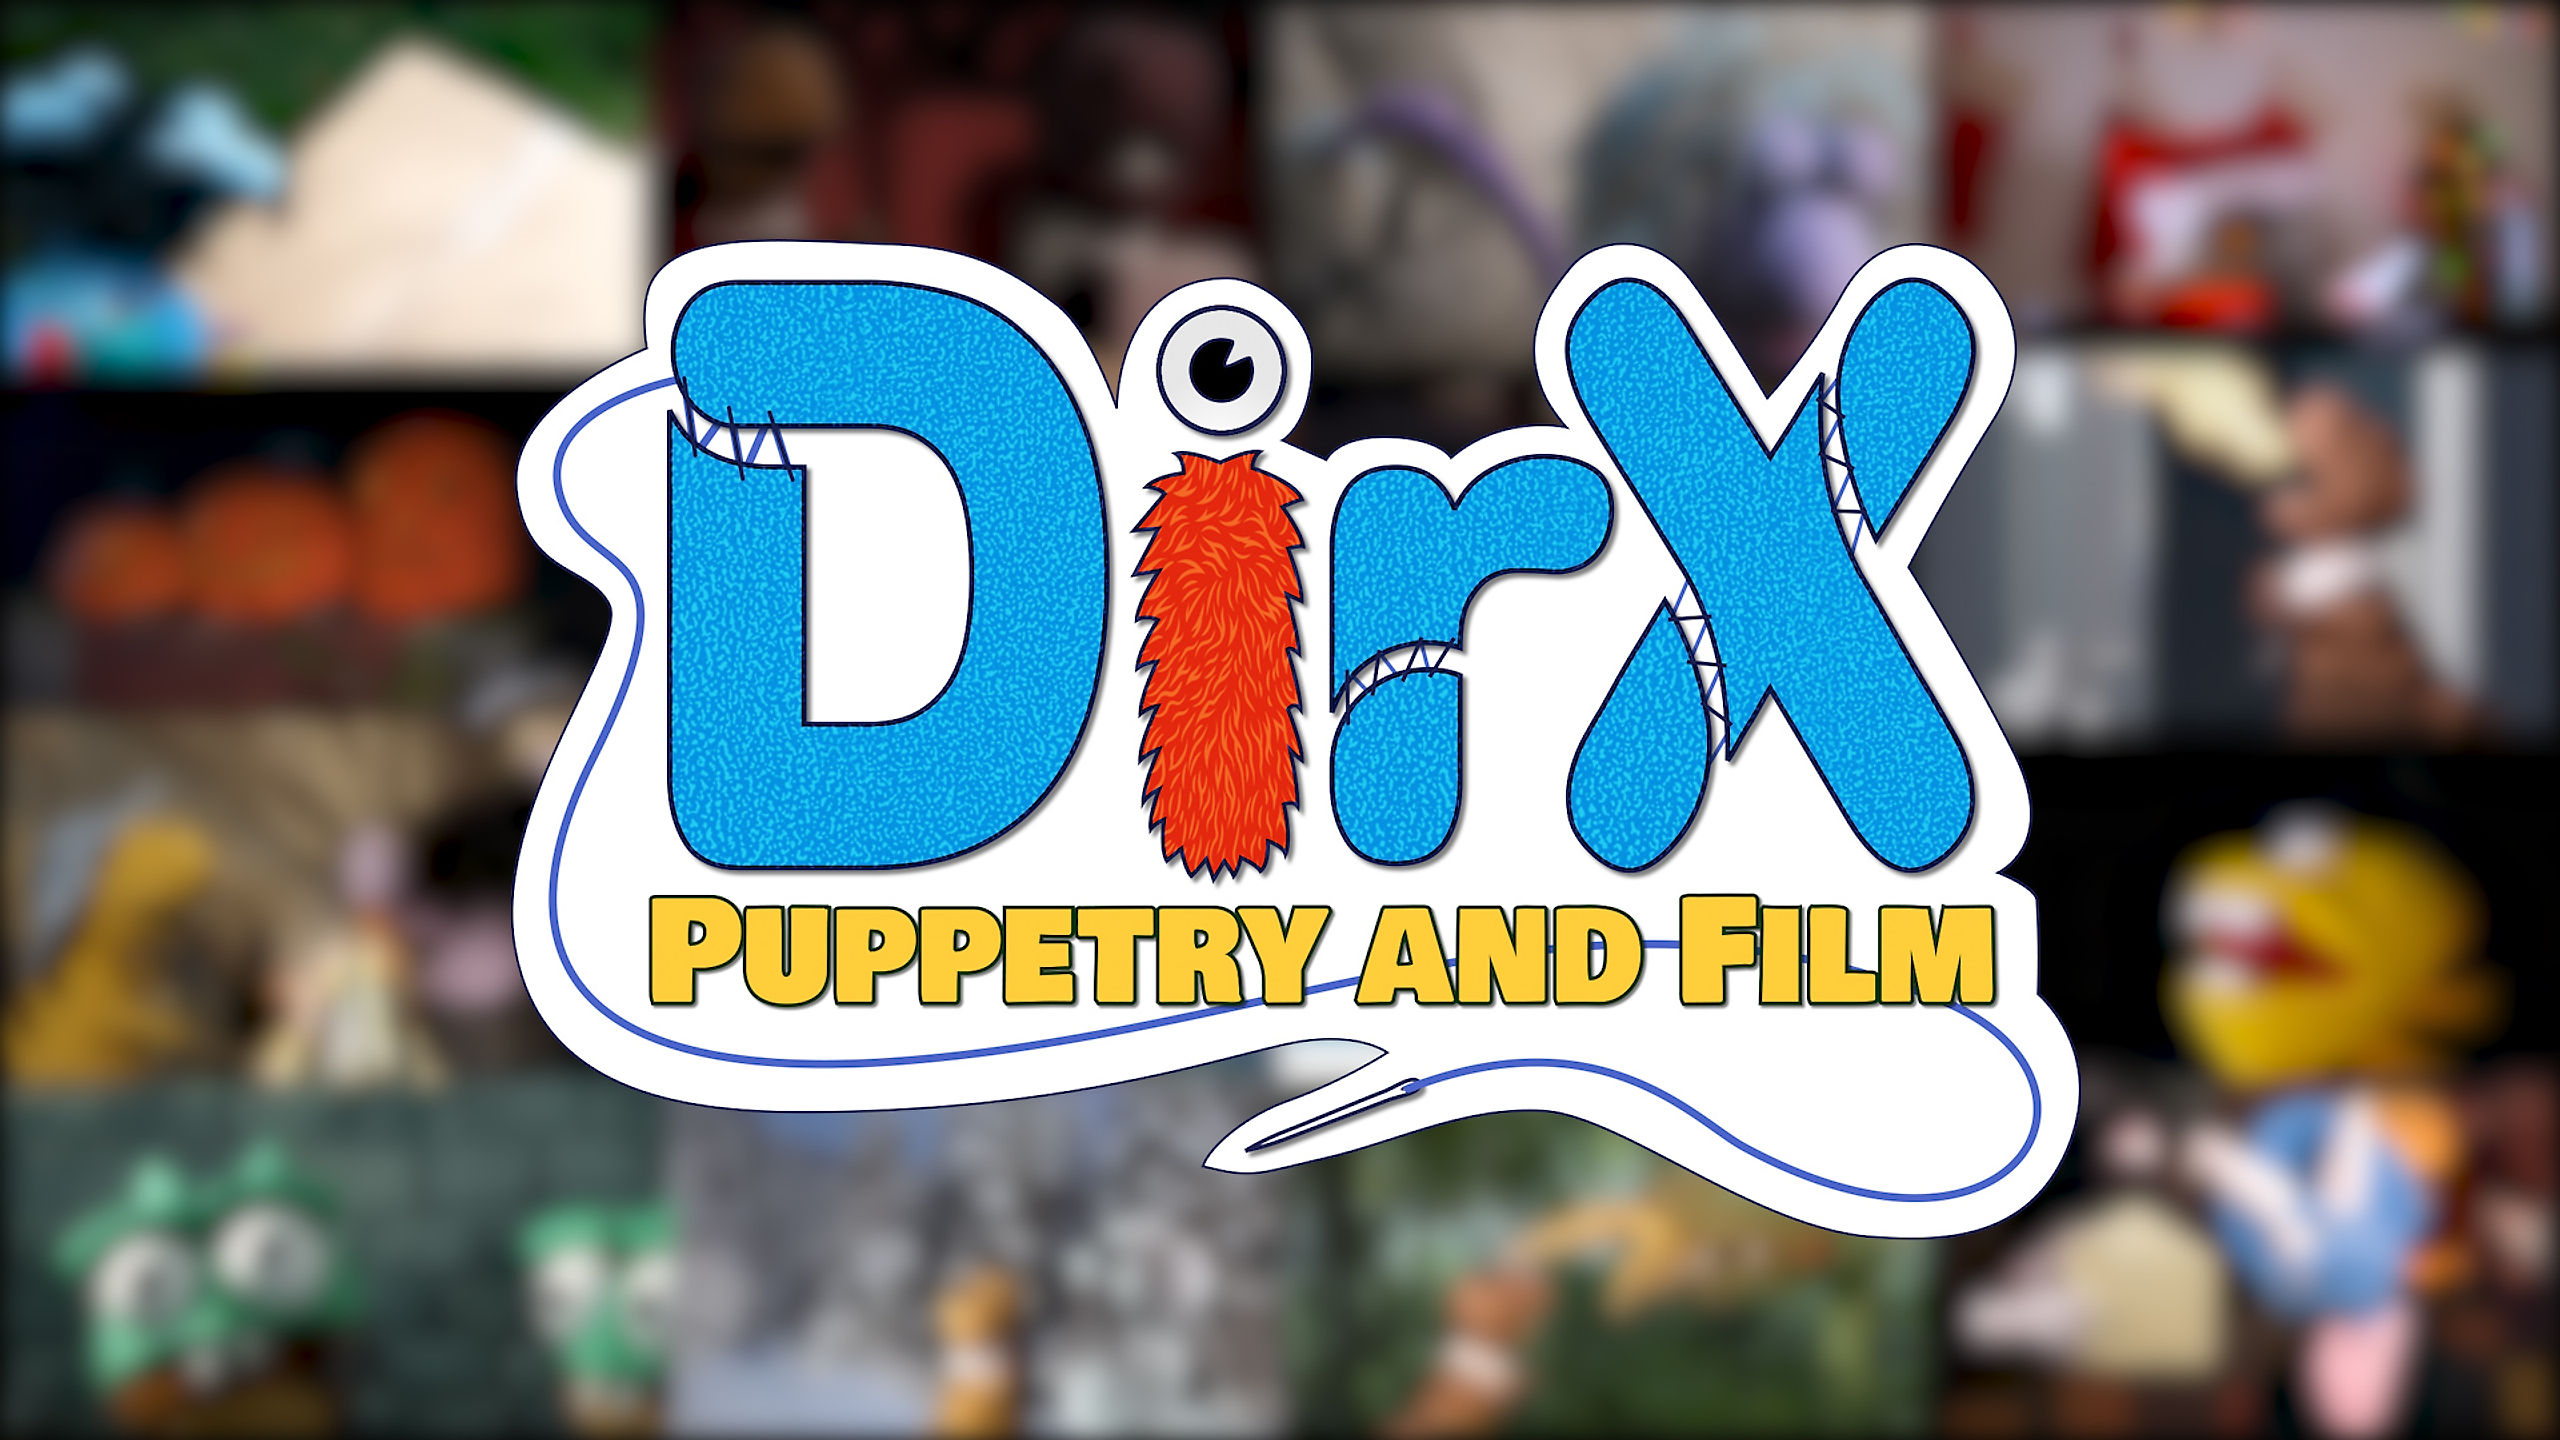 Dirx Puppetry and Film